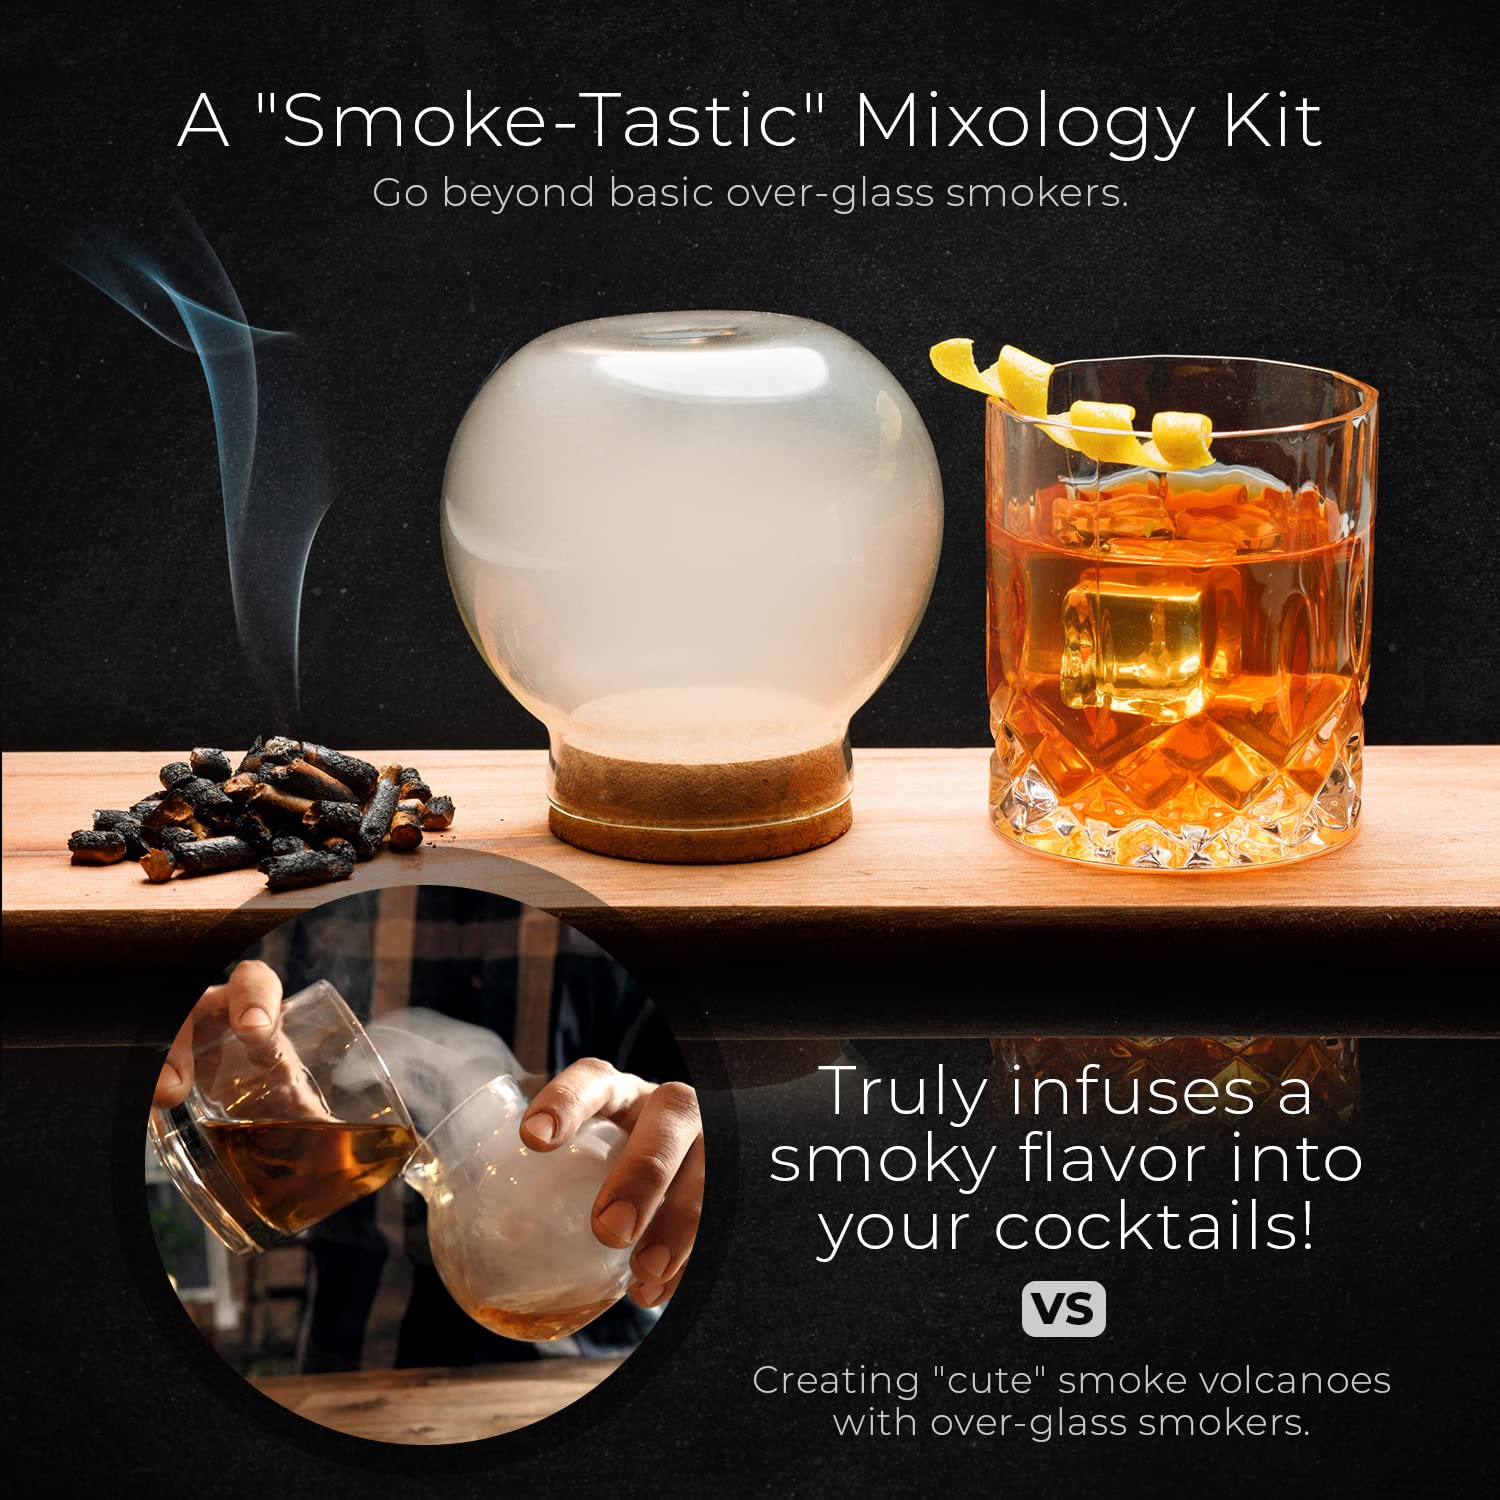 Smoked and Infused Cocktail Smoker Kit w/Torch - Six Flavors - Old Fashioned Gift Box for Men - Infuse Whiskey & Bourbon - Essential Home Bar Tools - Infuser for Bartender & Cocktails Lover (Graphite)